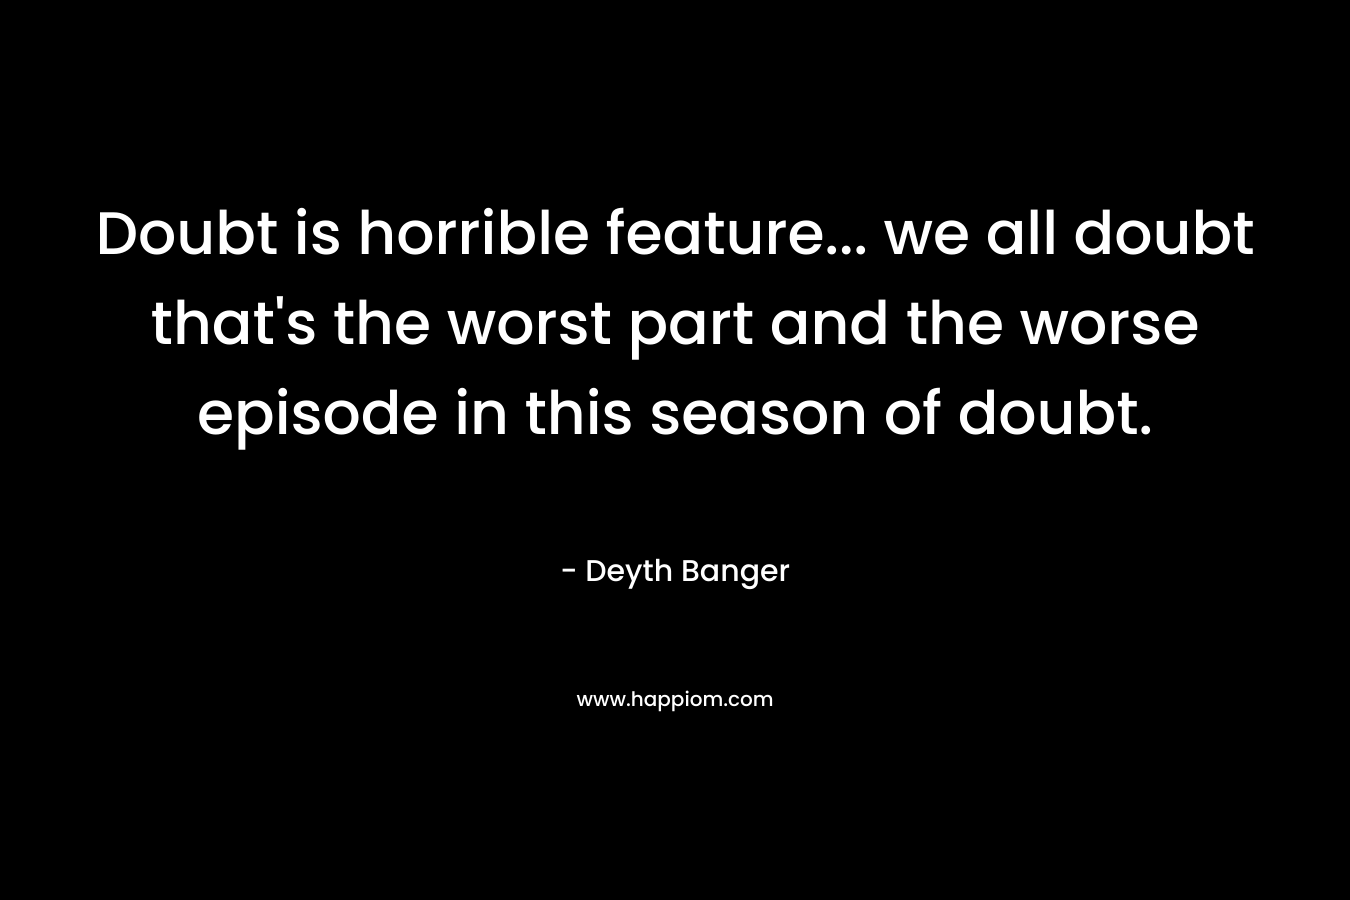 Doubt is horrible feature… we all doubt that’s the worst part and the worse episode in this season of doubt. – Deyth Banger